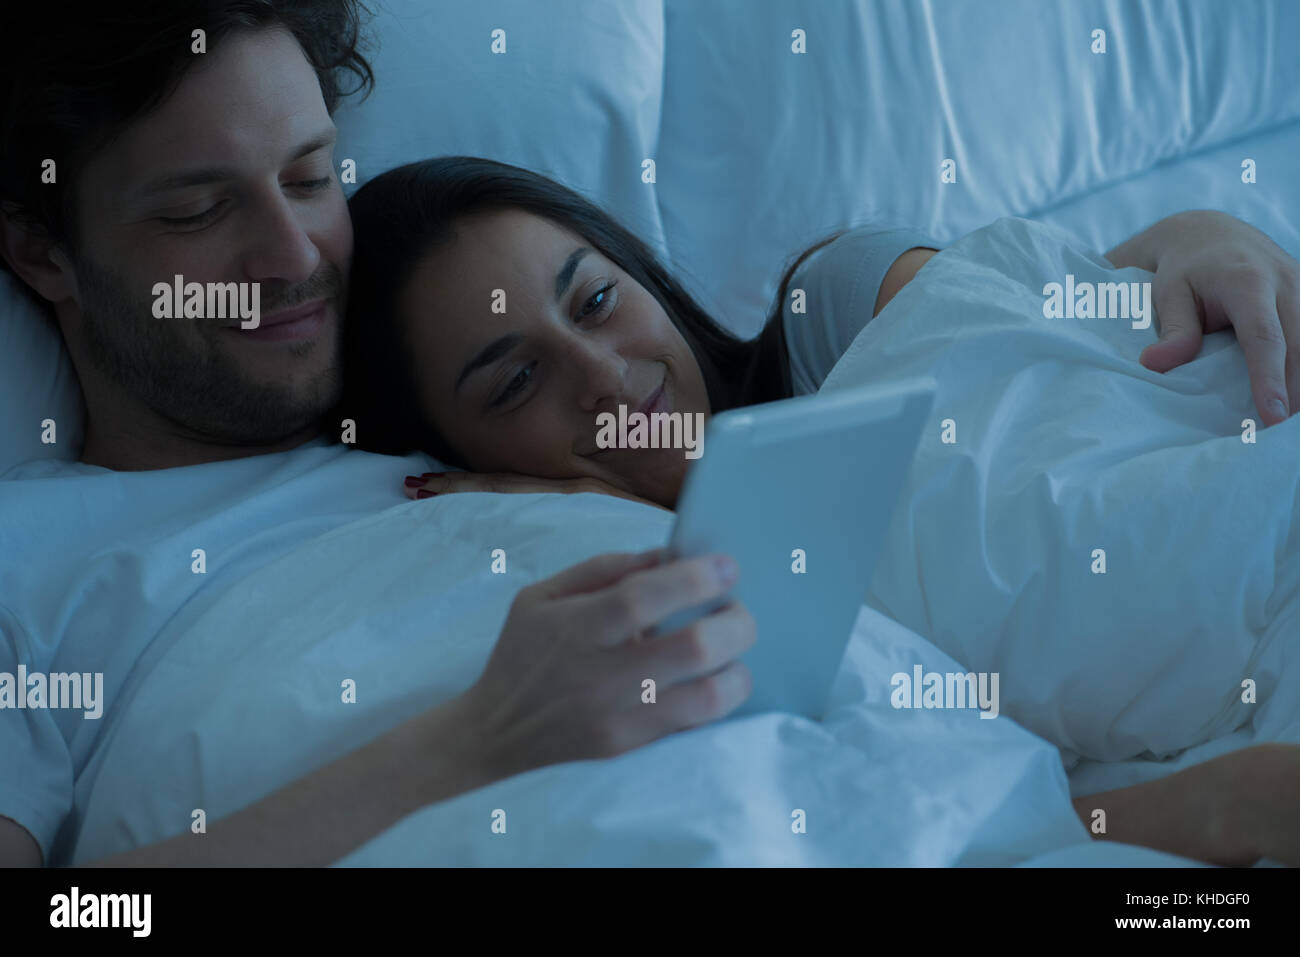 Couple using digital tablet in bed Banque D'Images